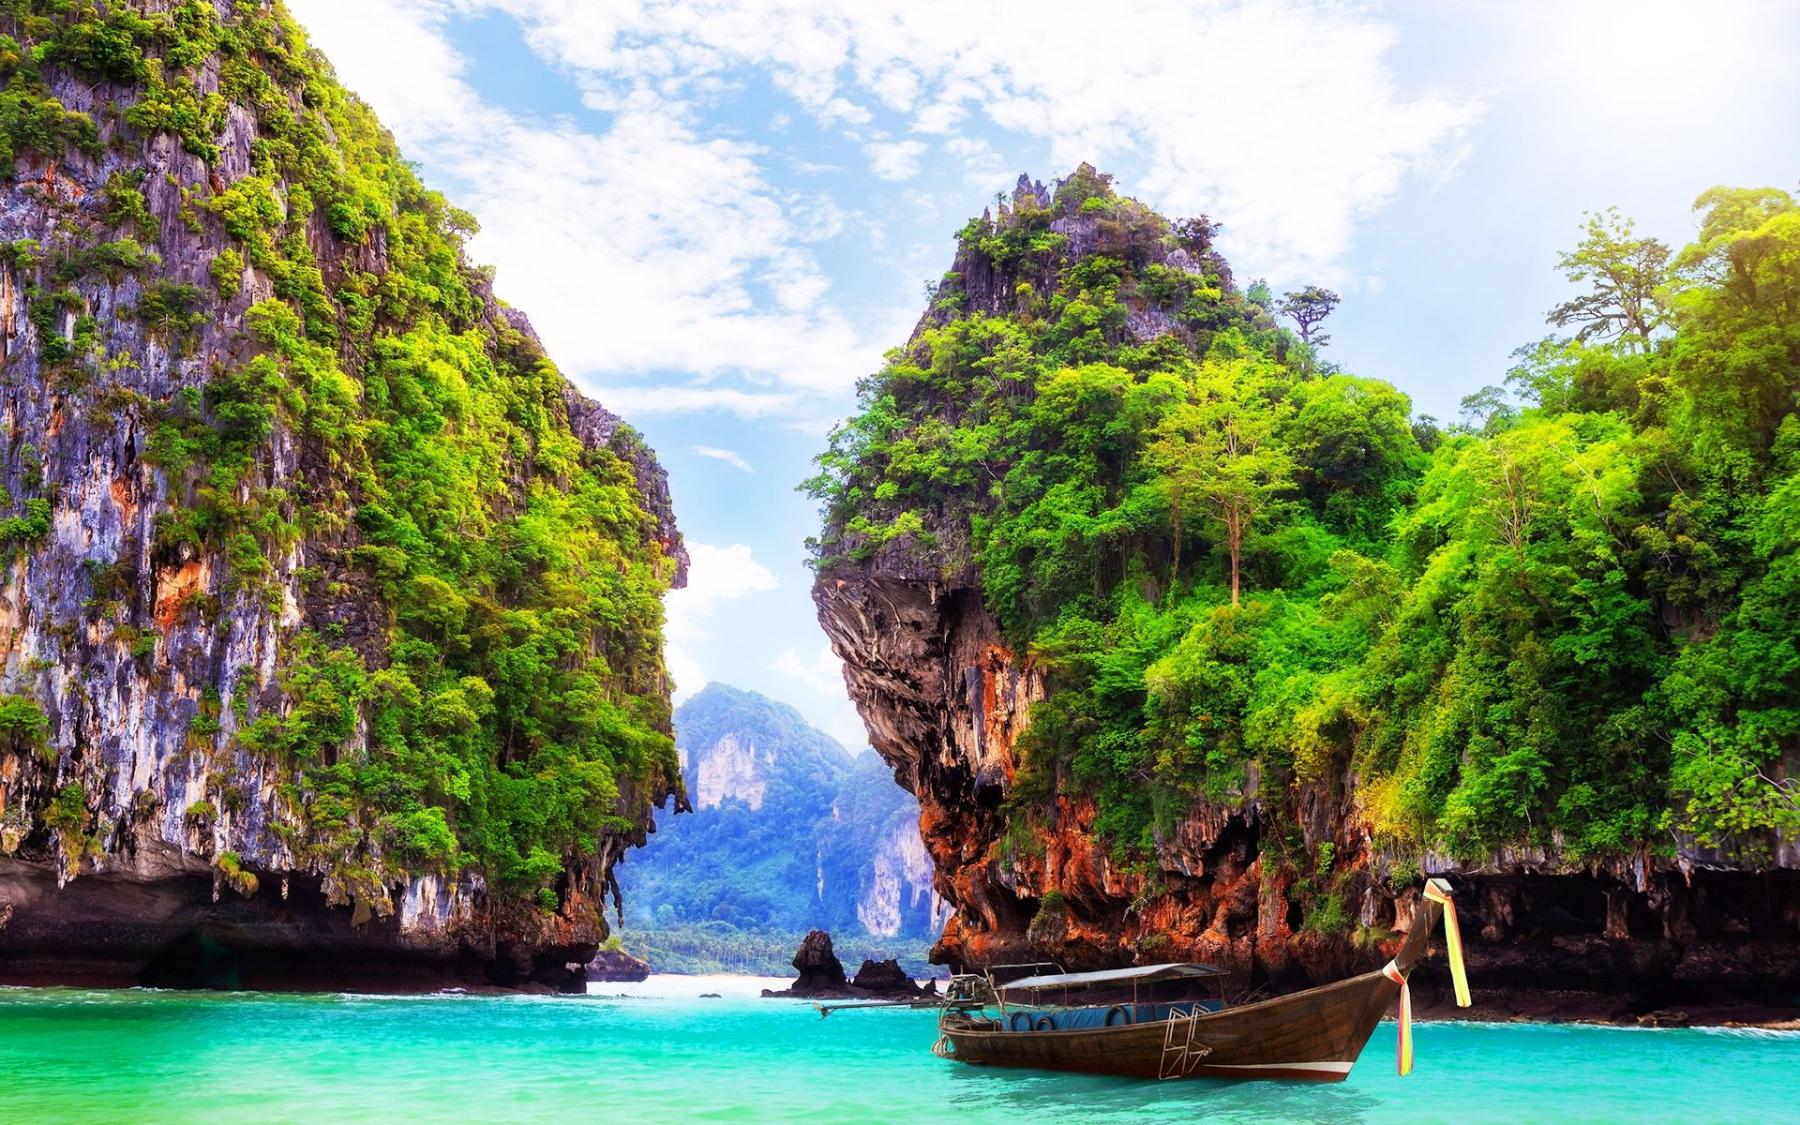 Thailand: Finding Bliss Amidst Nature